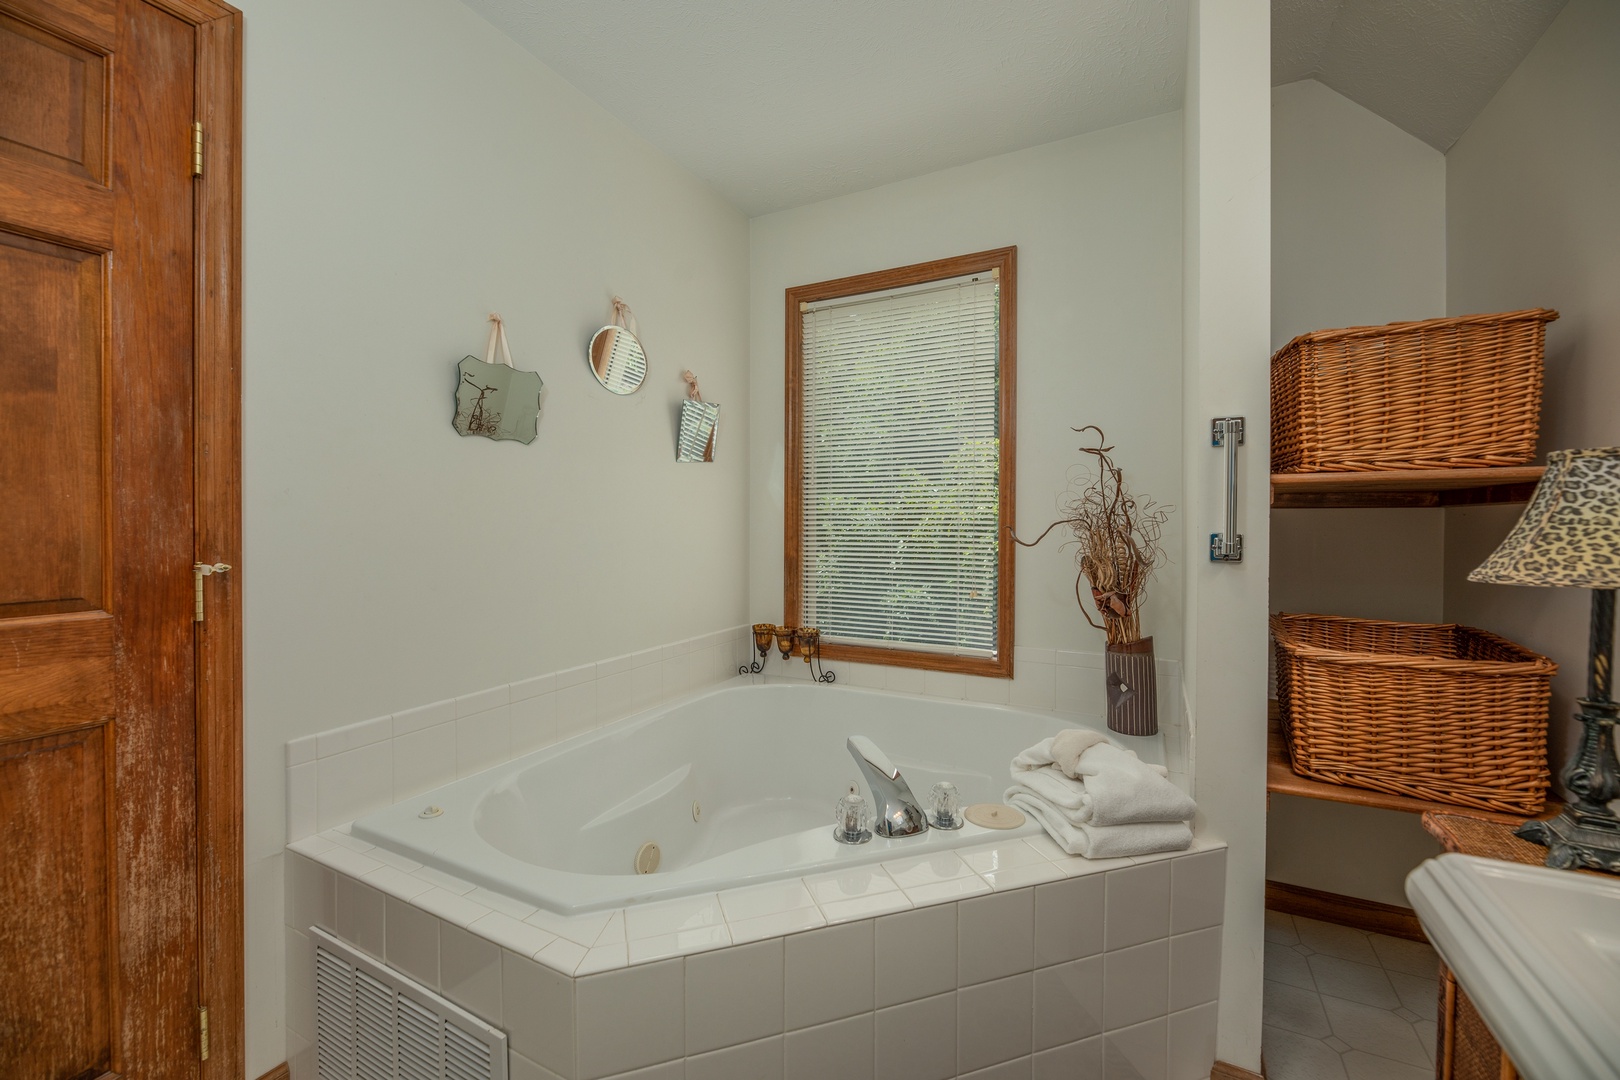 Corner jacuzzi tub at Amazing Memories, a 3 bedroom cabin rental located in Pigeon Forge